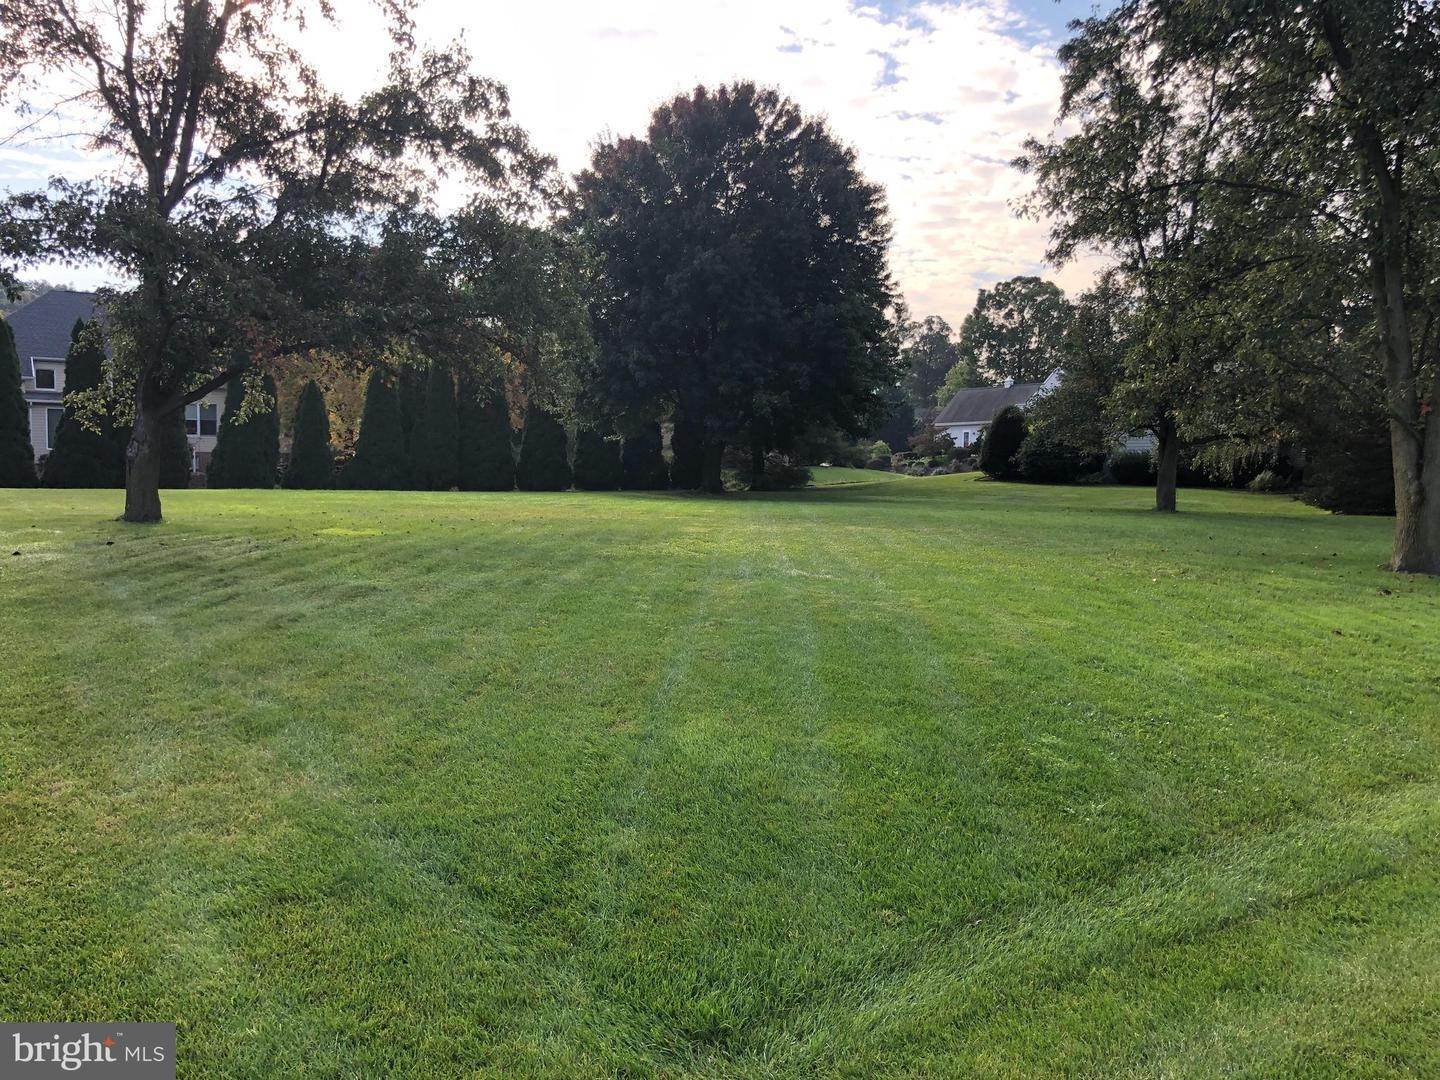 3. Land for Sale at Fayetteville, PA 17222